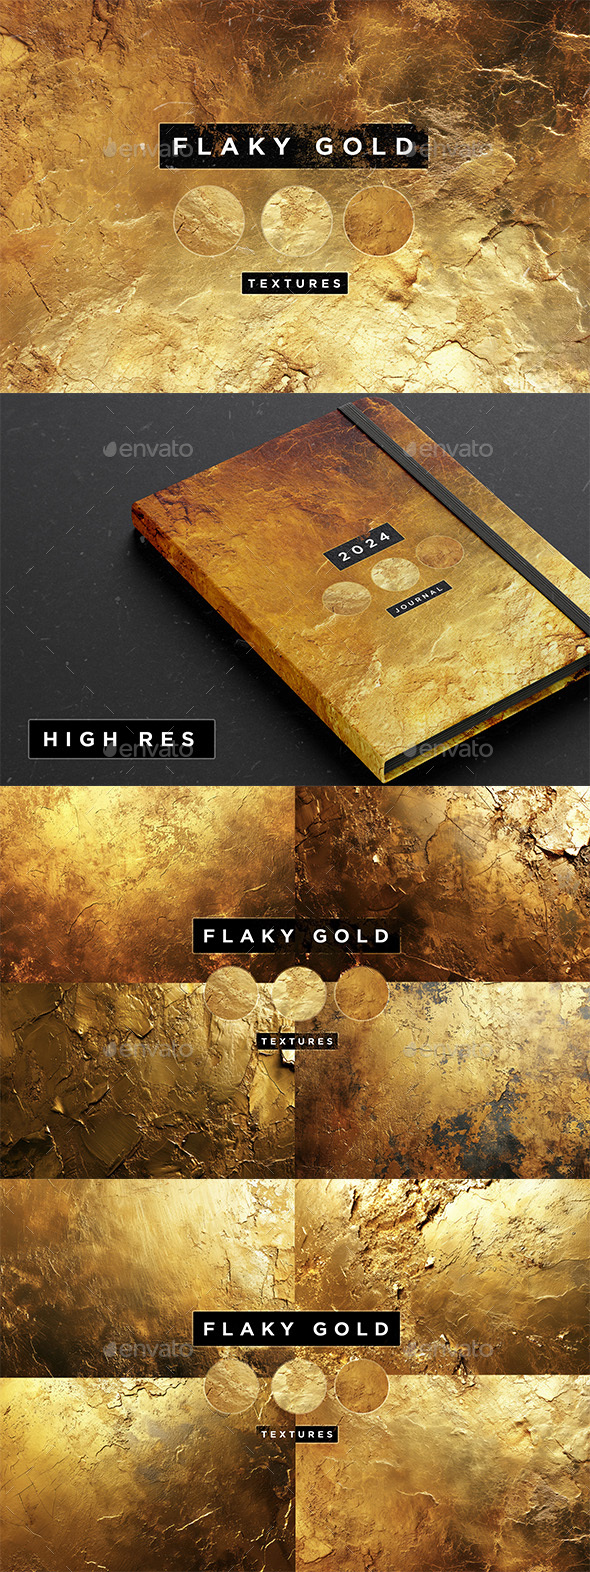 [DOWNLOAD]Flaky Gold Texture Pack